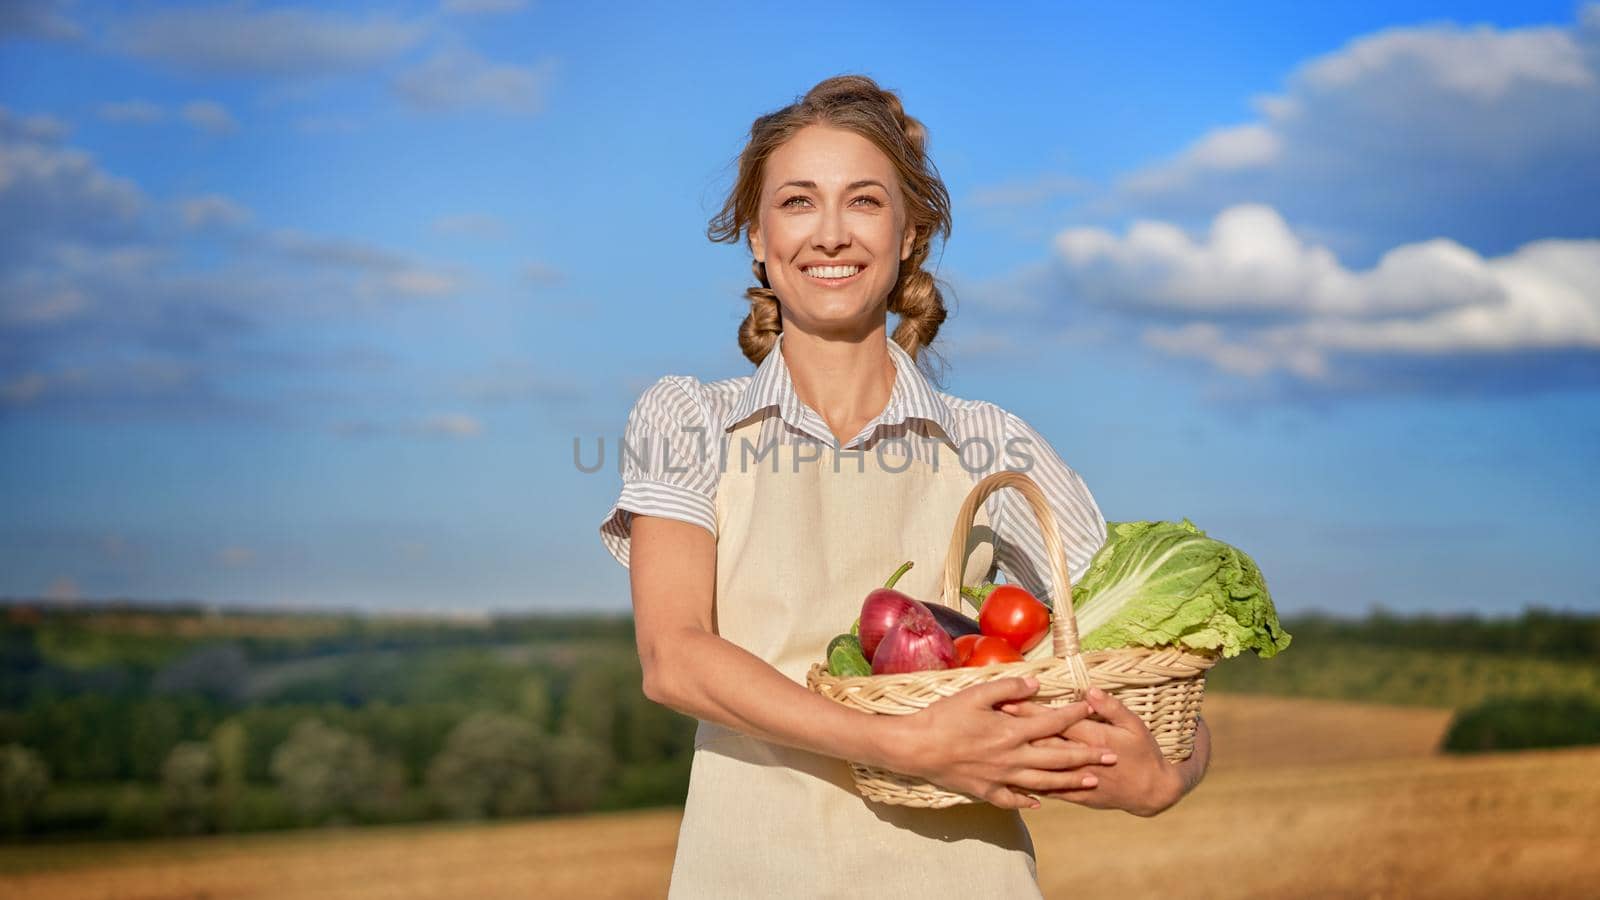 Woman farmer holding basket vegetable onion tomato salad cucumber standing farmland smiling Female agronomist specialist farming agribusiness Happy Girl dressed apron cultivated wheat field